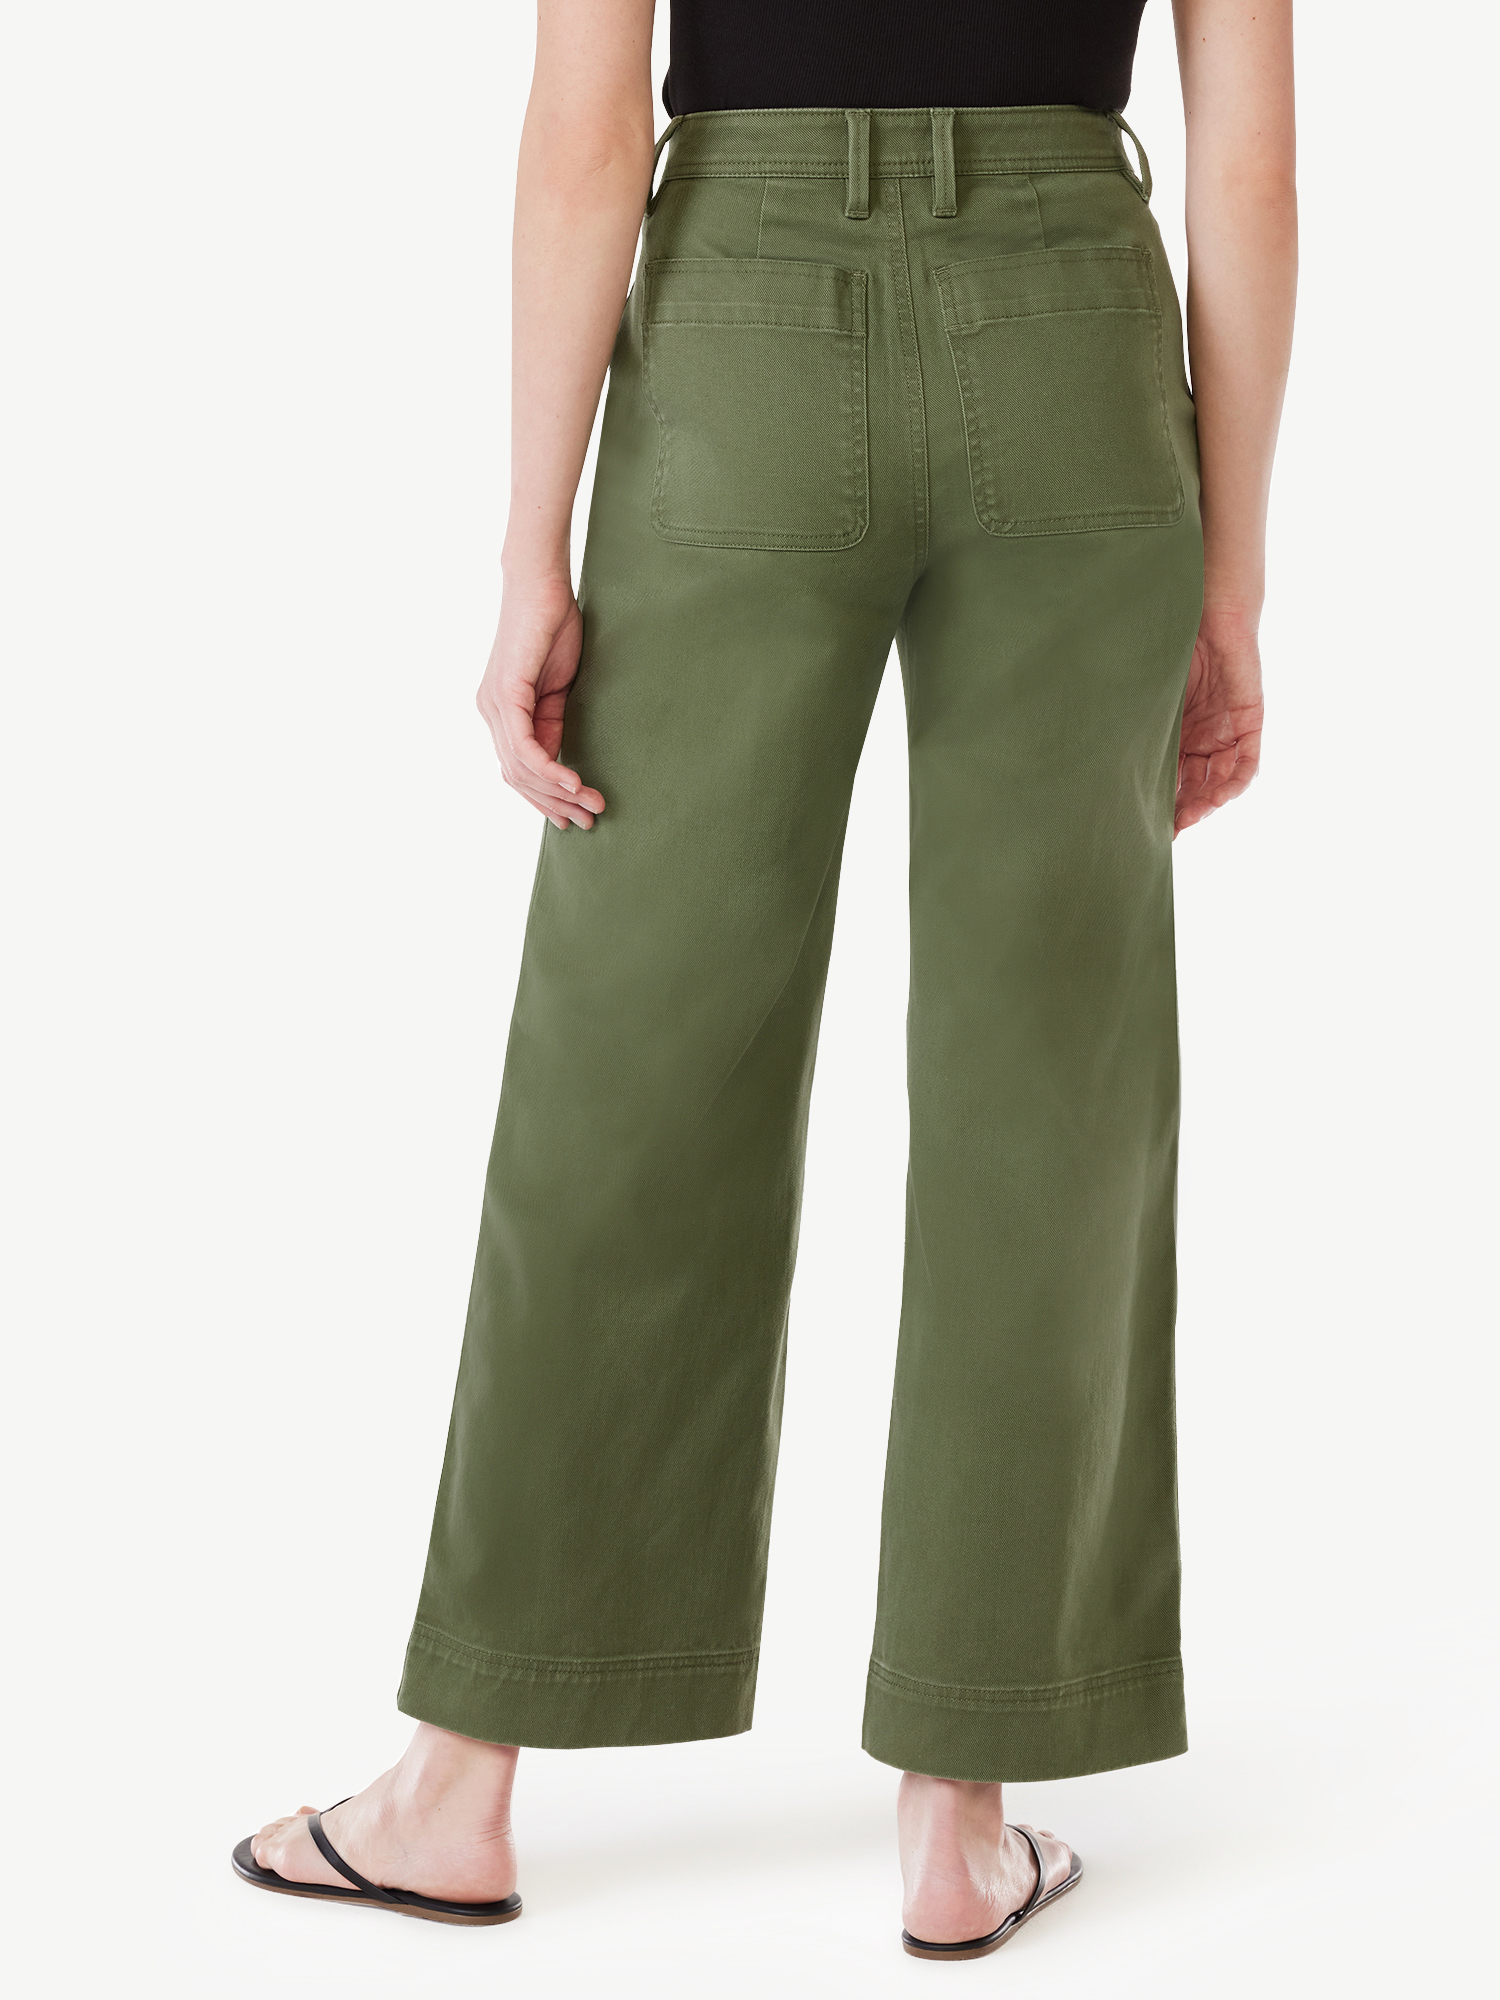 Free Assembly Women's Utility Wide Leg Straight Pants - image 3 of 6